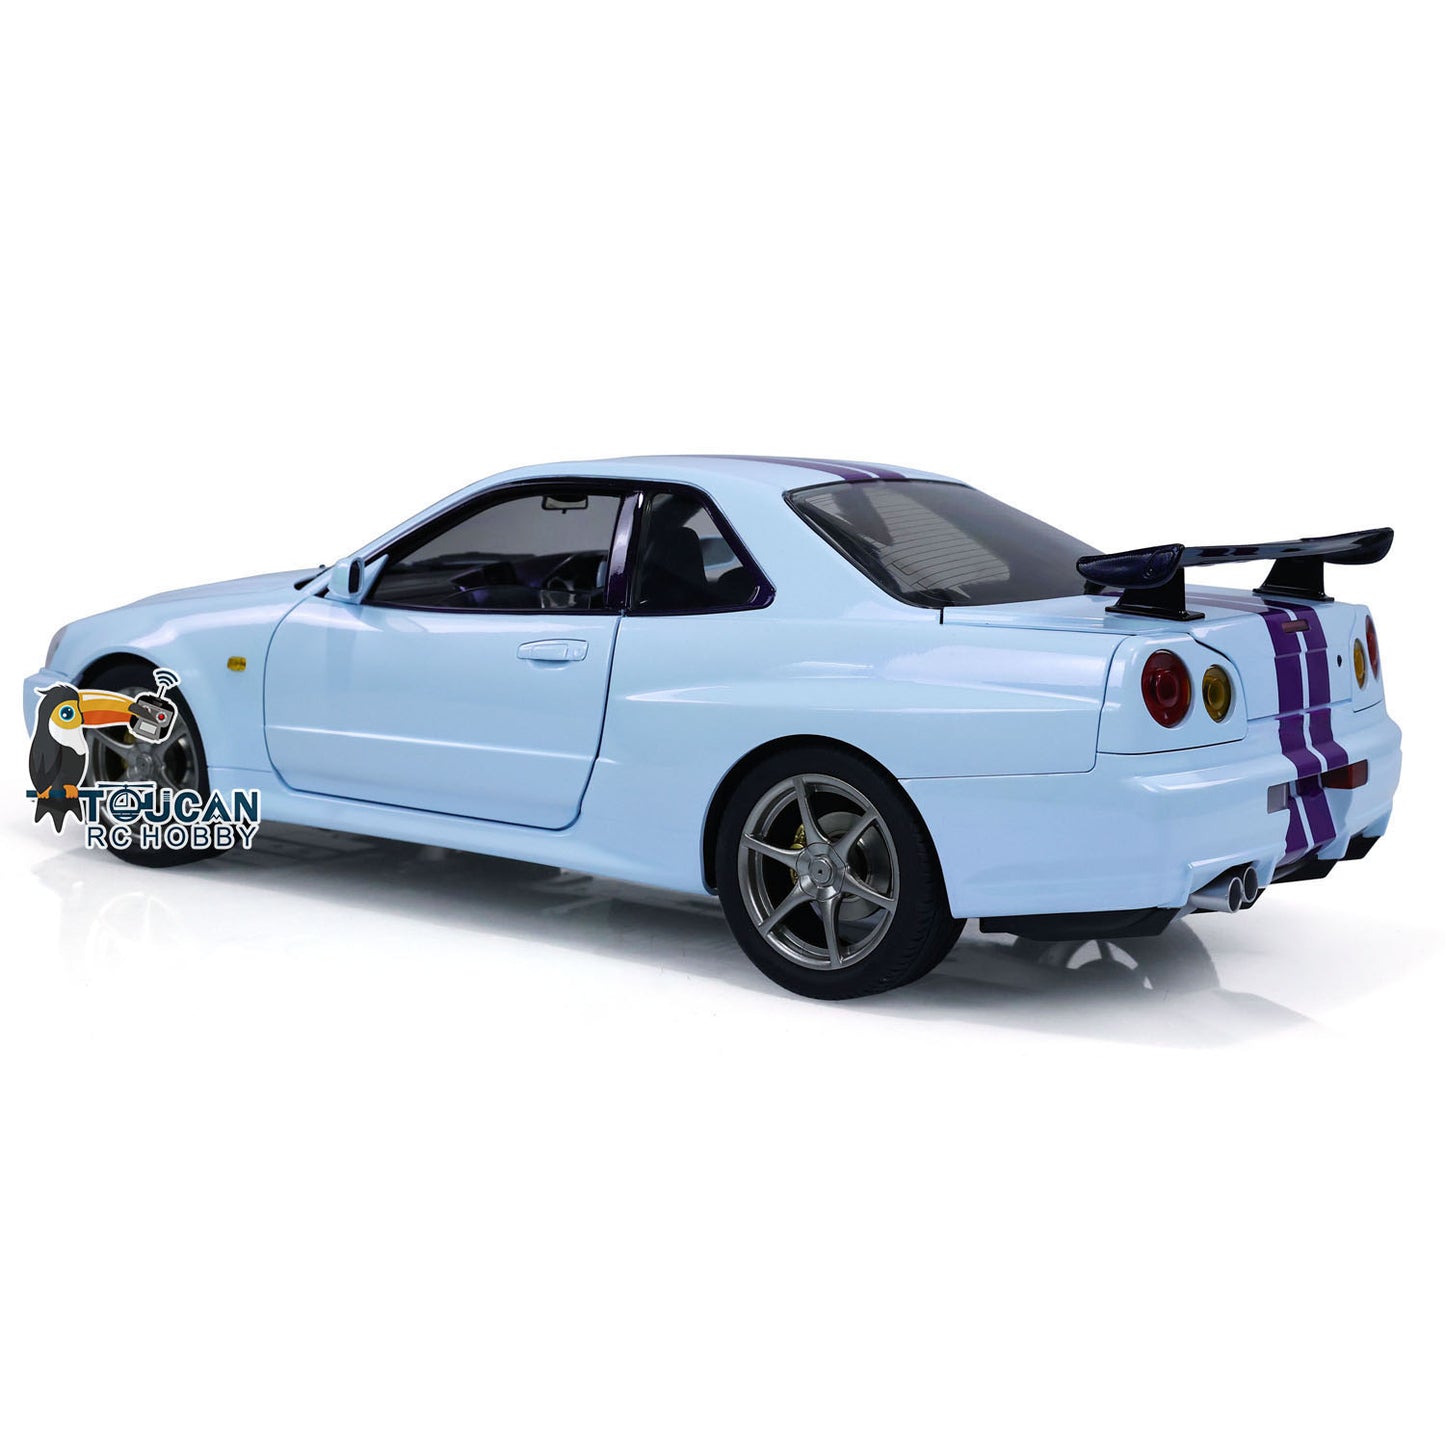 IN STOCK Capo 4WD 1/8 Metal RC Racing Car R34 4x4 High Speed RTR Remote Controlled Drift Vehicles Sound Smoking RTR Upgraded Version